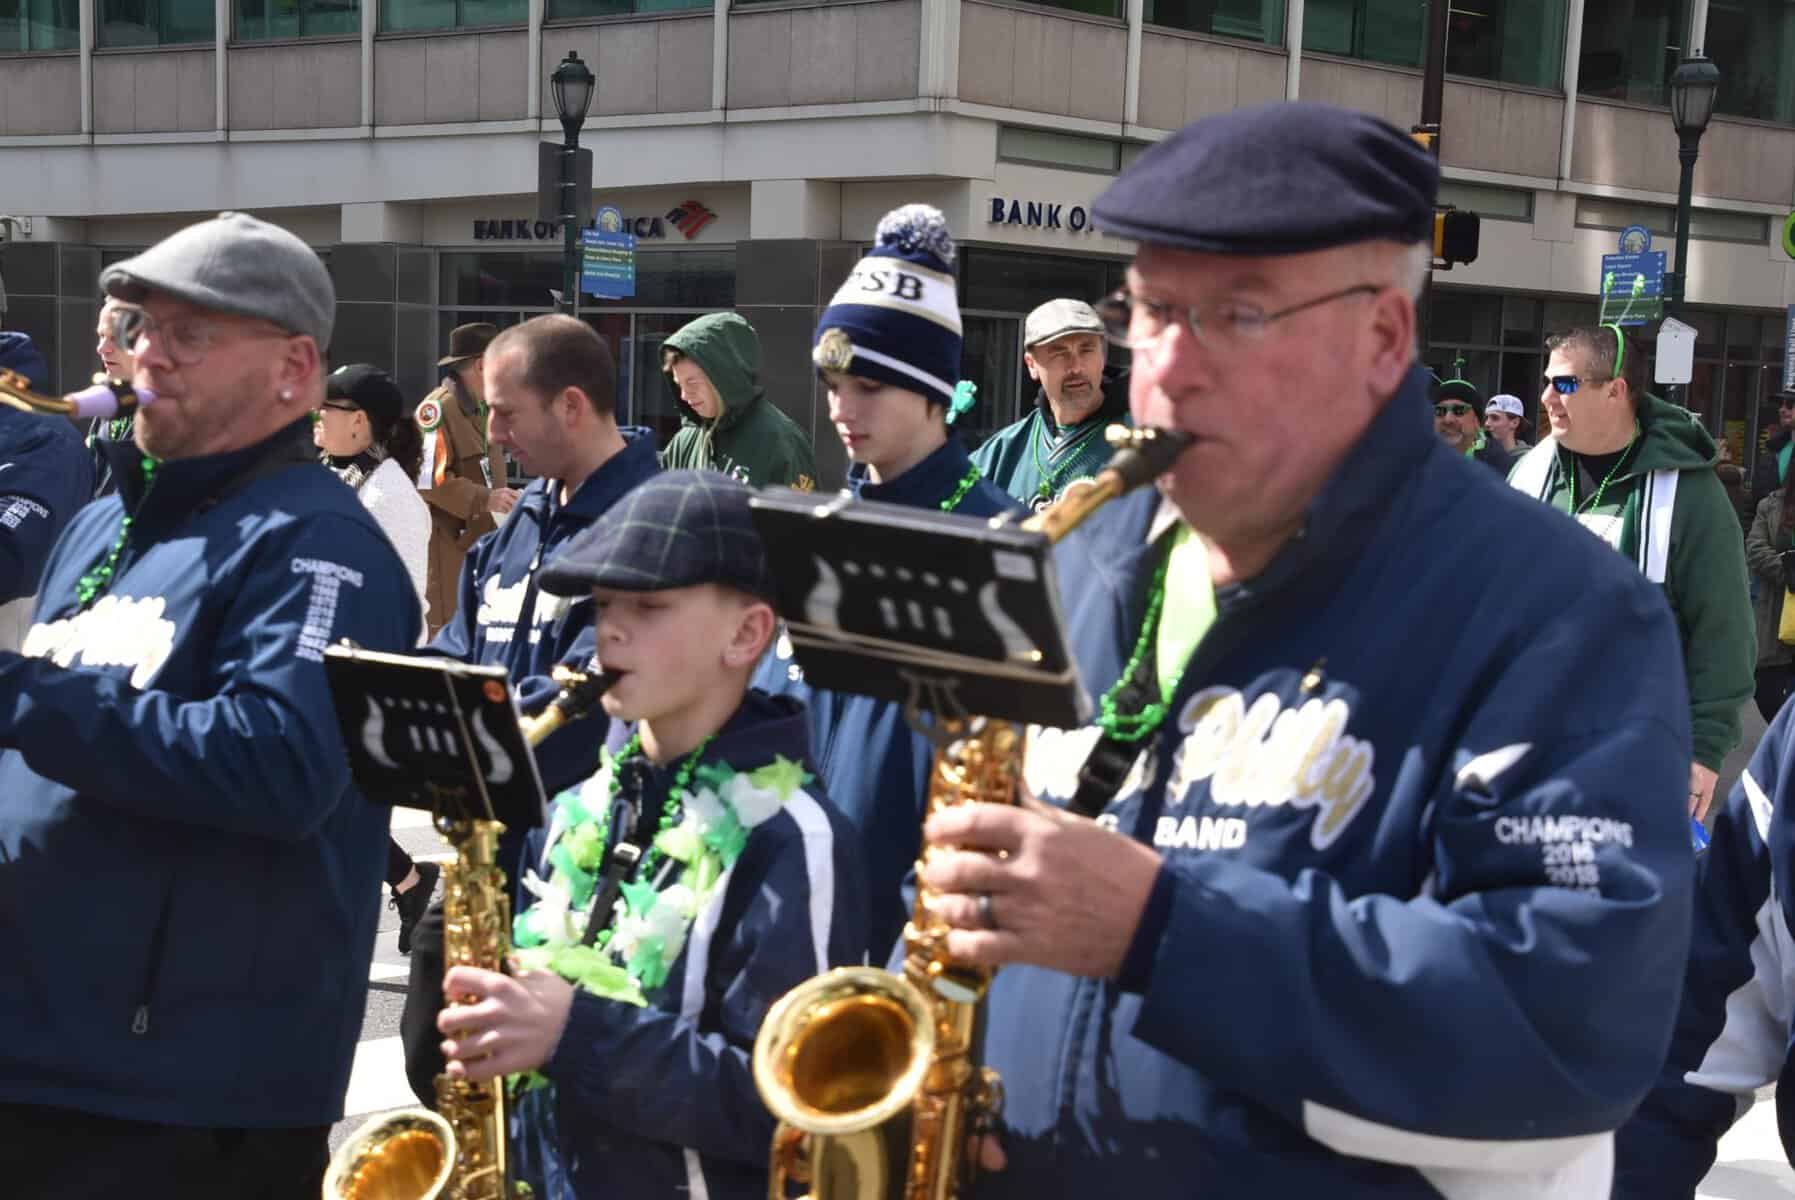 Scenes from St. Patrick’s Day Parade